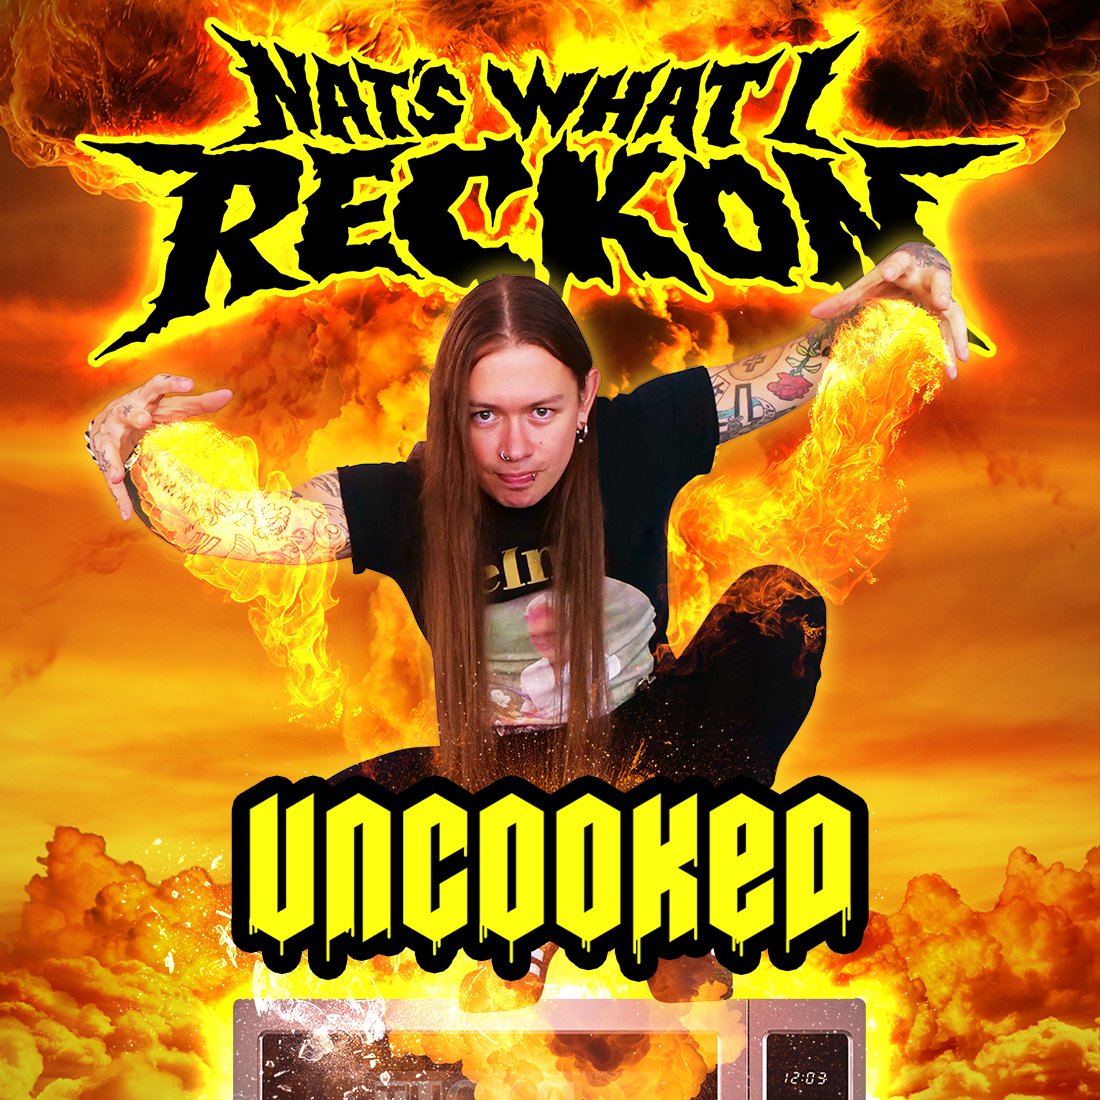 The image is an apocalyptic, firey background with a firey sky and a black "NAT'S WHAT I RECKON" logo with flames burtsing out of it. At the bottom of the pic the show title "UNCOOKED" with the letters slightly melting. Nat squats on top of an old-school microwave oven, staring ionto the camera with his arms raised as if he is about to launch into a "crow" pose or throw fireballs out of his hands! Nat is tattoed with long hair and is wearing a black Tshirt & jeans.